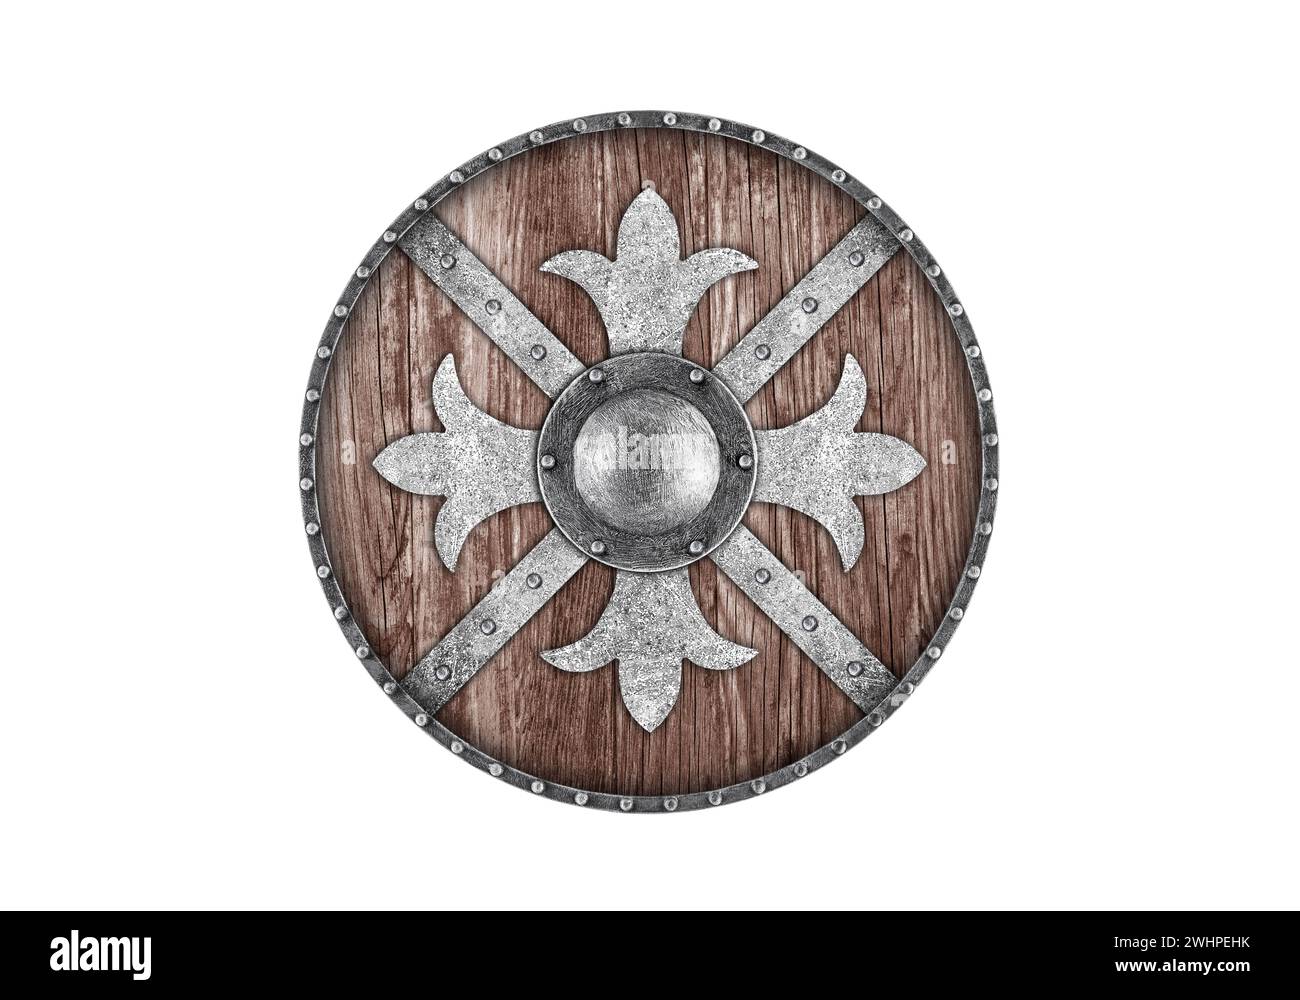 Old decorated wooden round shield isolated on white background Stock Photo